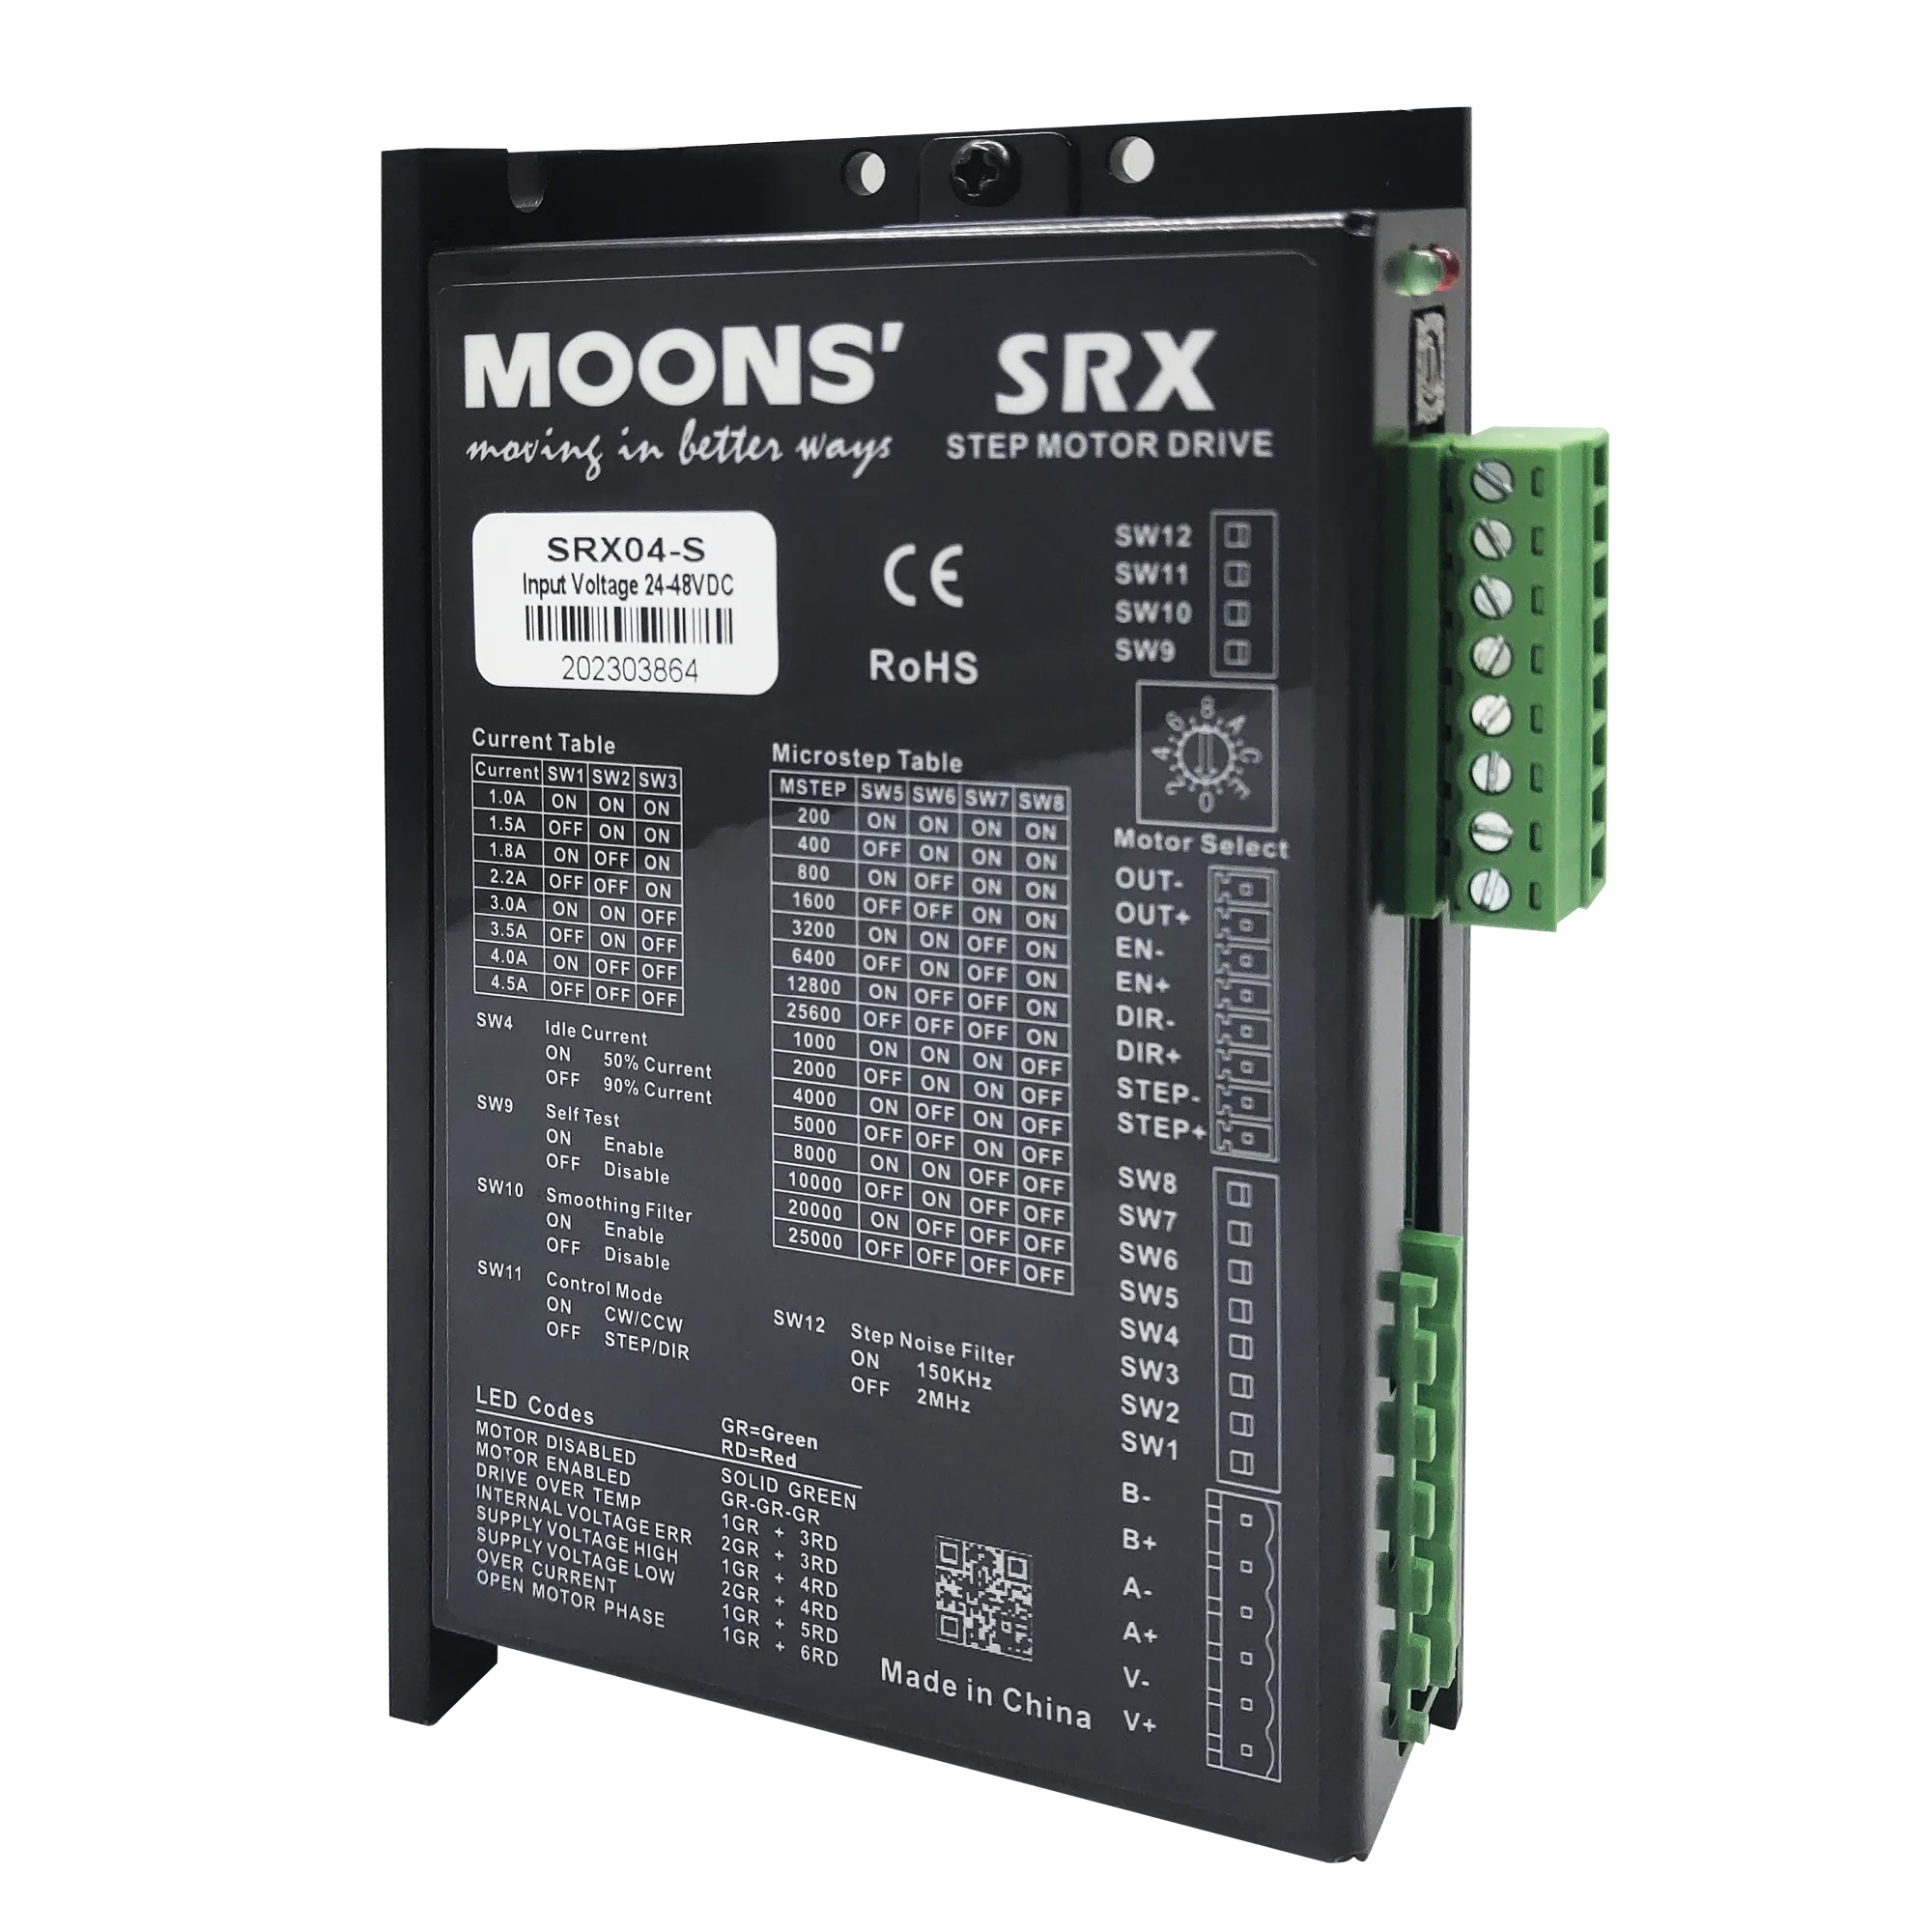 

MOONS Latest version SRX04-S 2-phase stepper drive 4.5a 24-48VDC micro step stepper motor drive